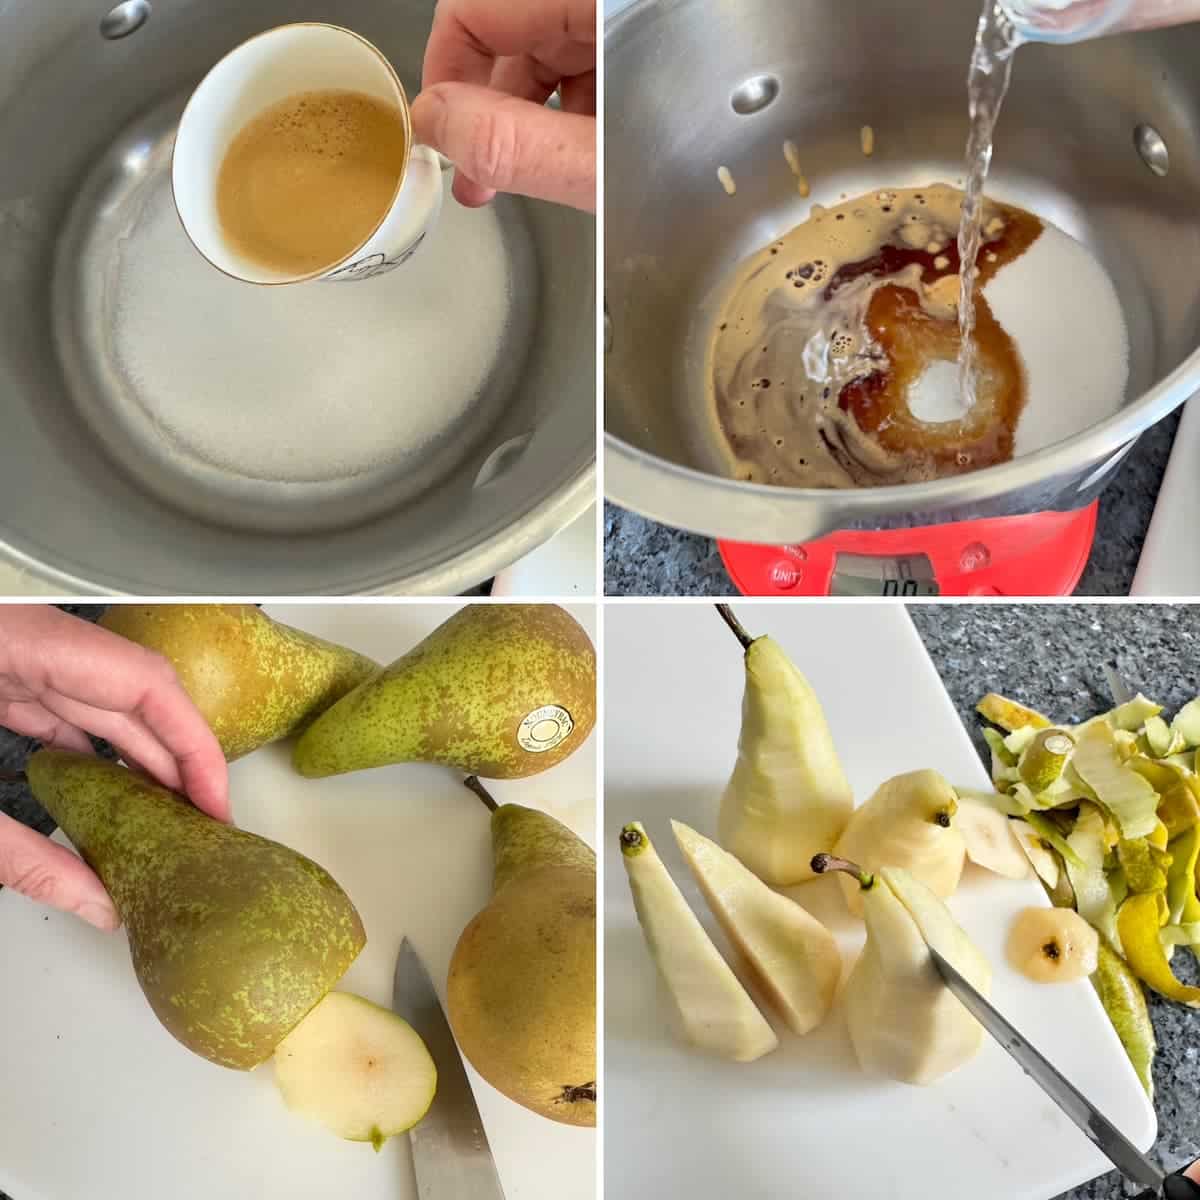 Preparing poaching syrup and peeled pears